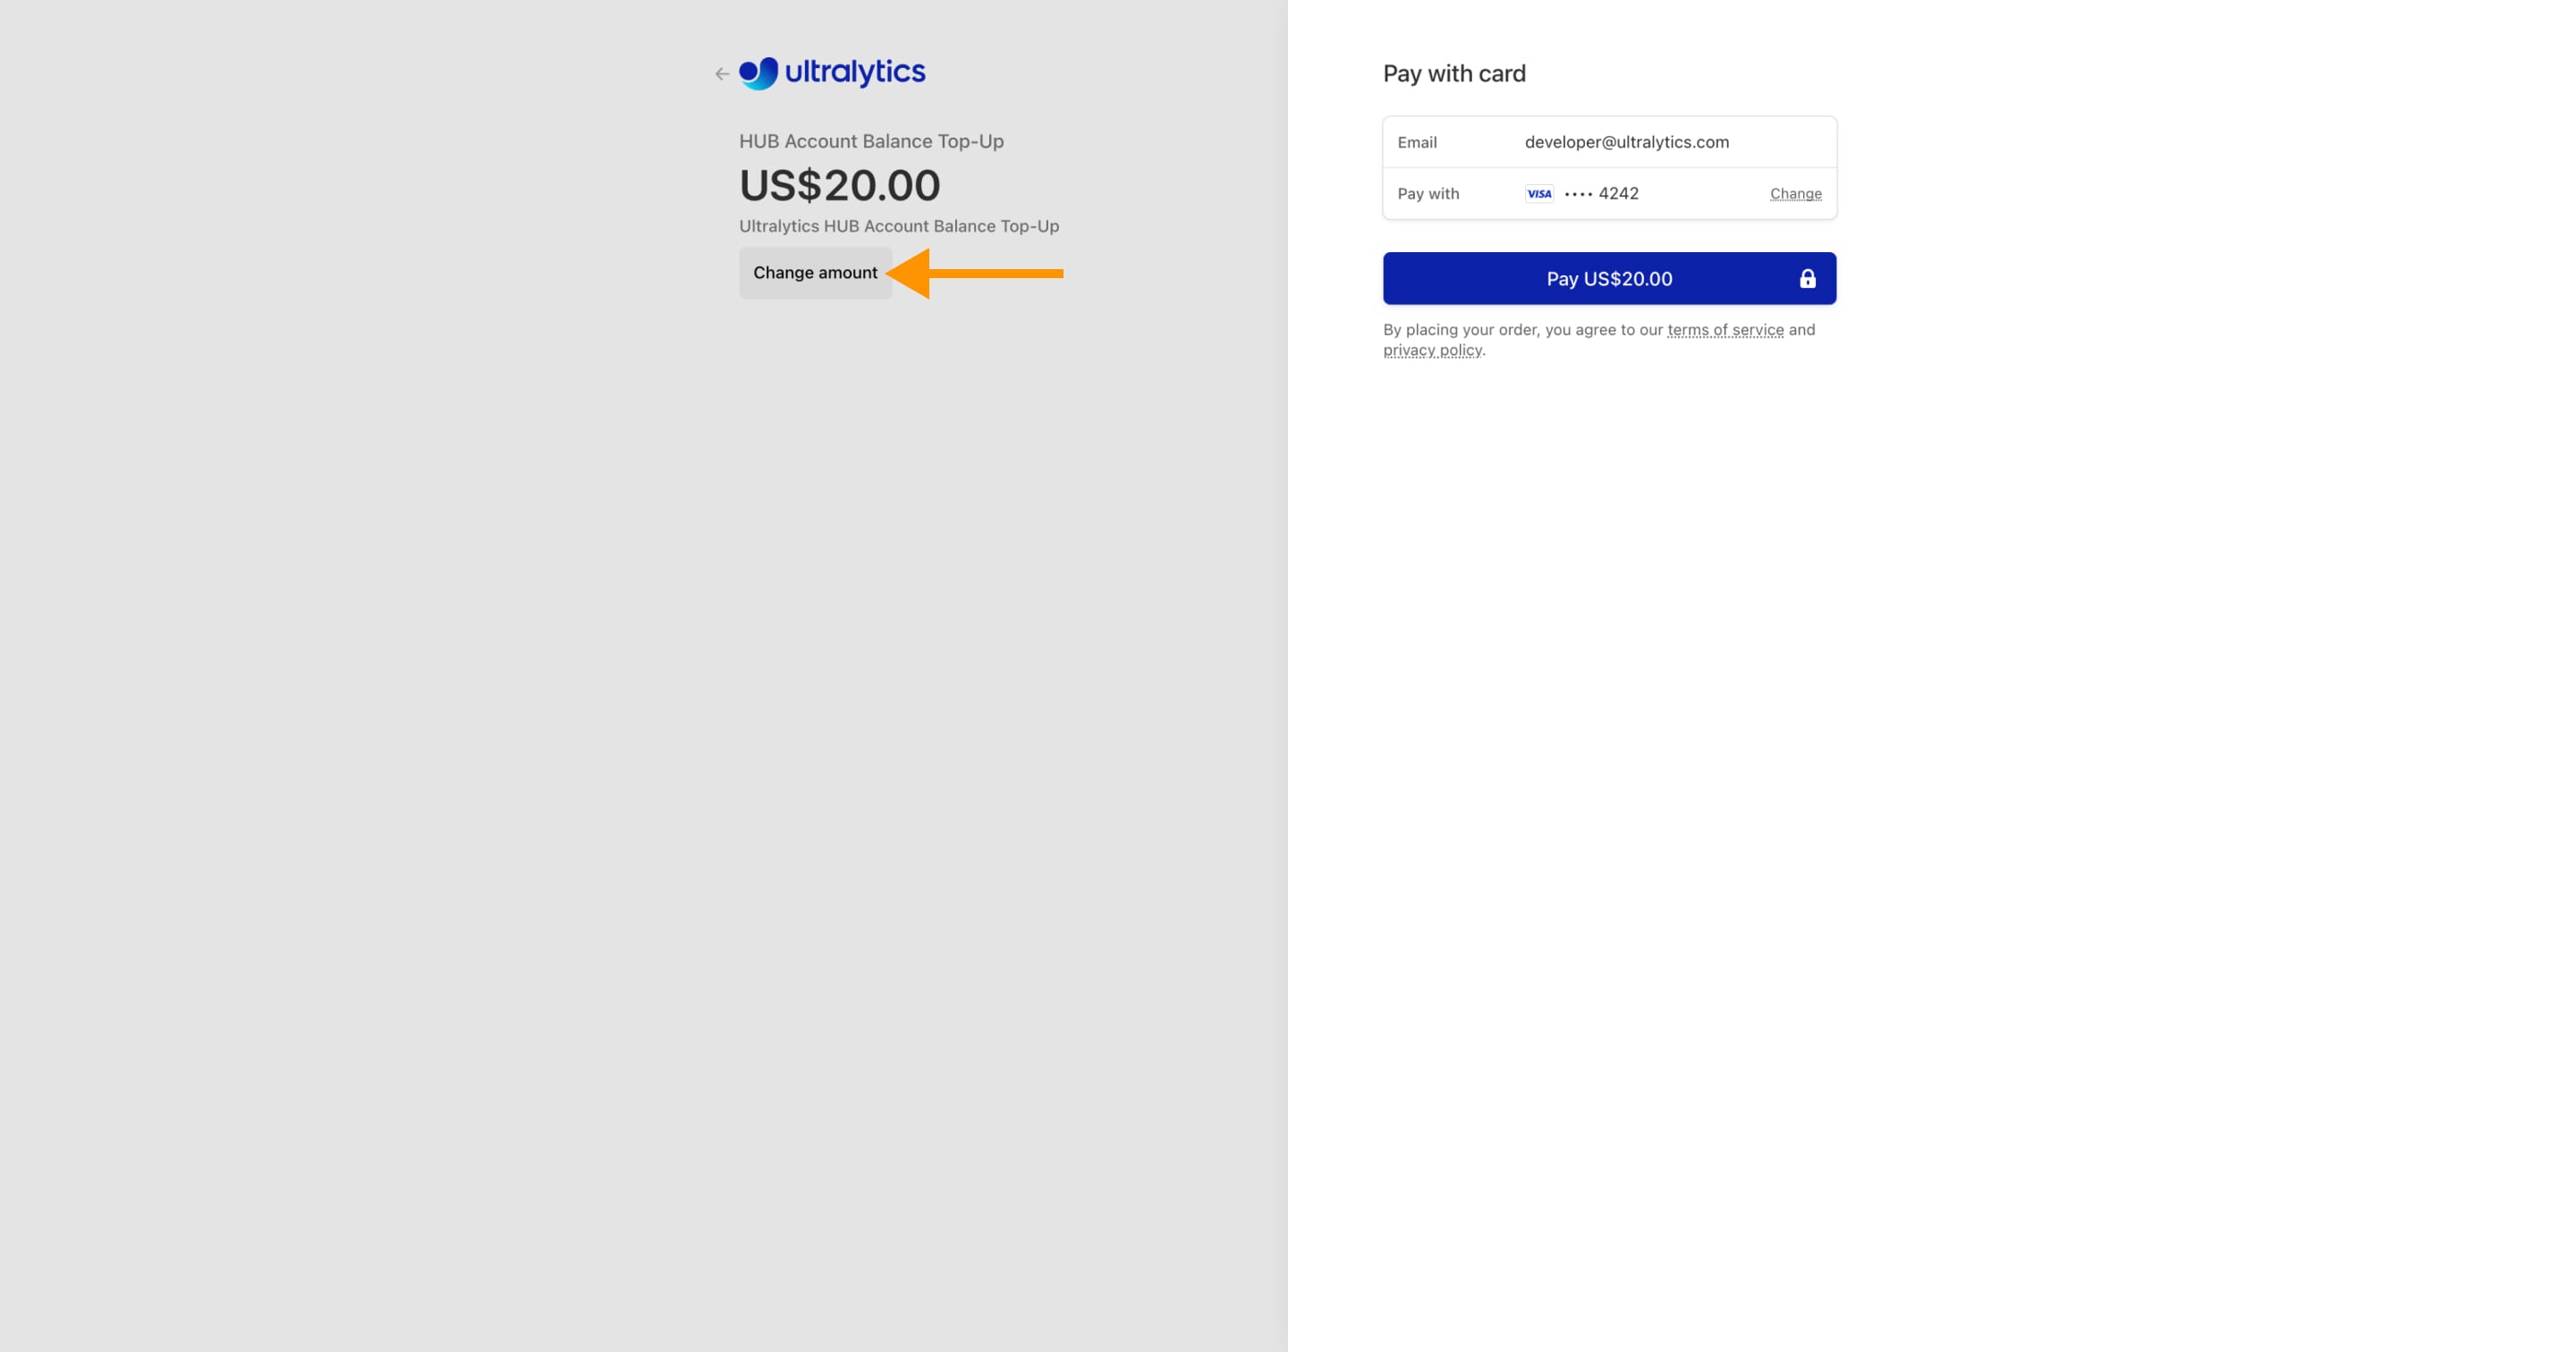 Ultralytics HUB screenshot of the Checkout with an arrow pointing to the Change amount button